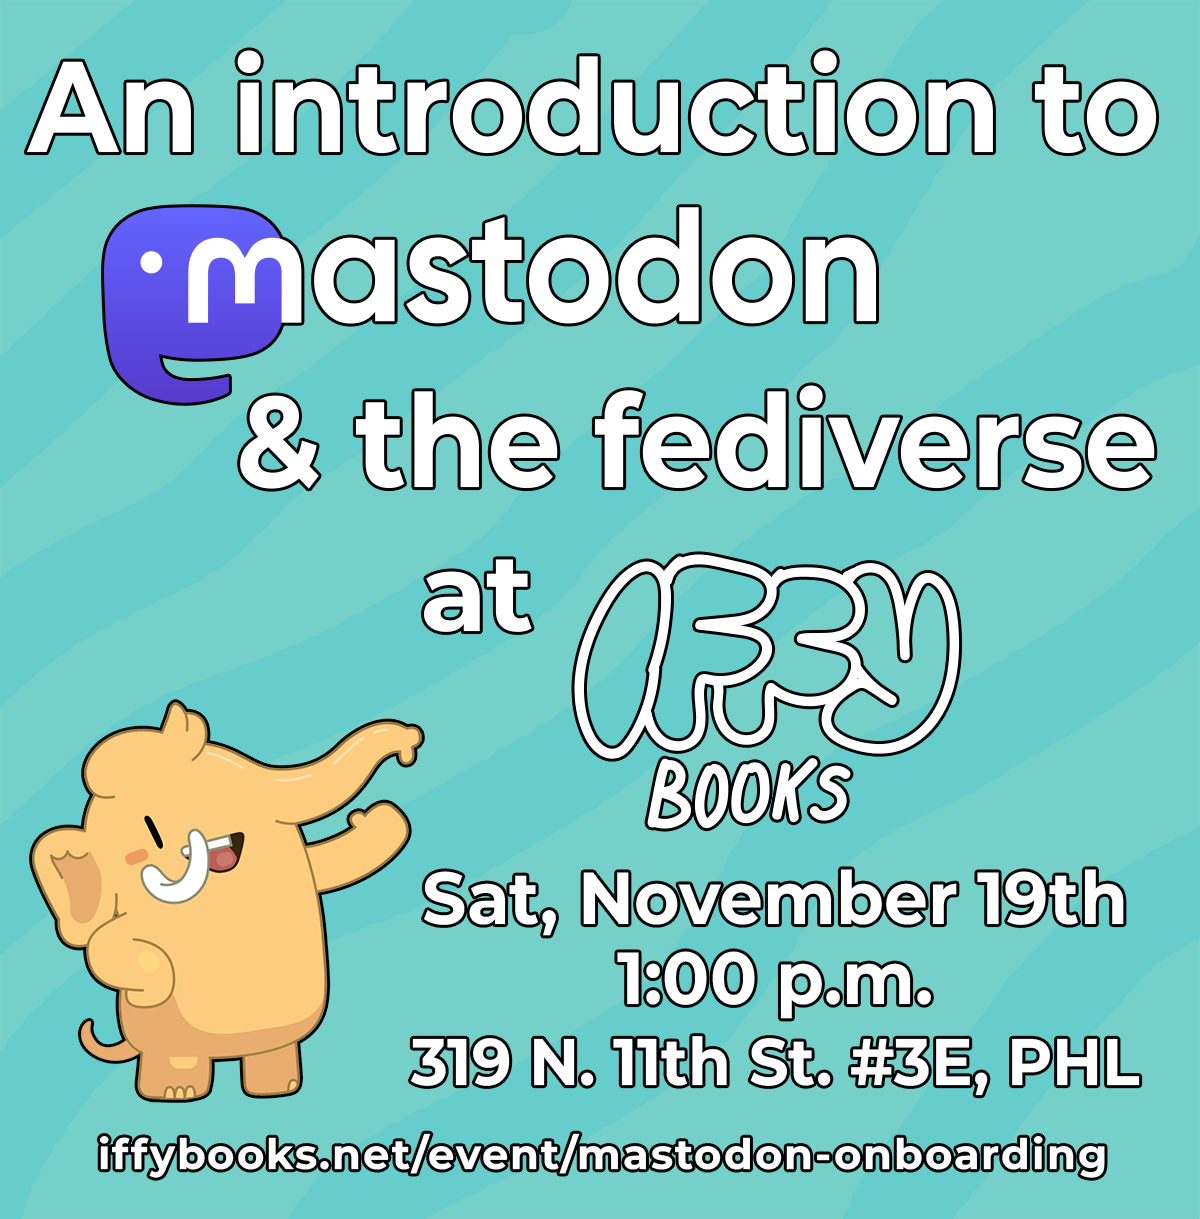 Flyer with a teal background, a cartoon Mastodon smiling and waving, and the following text: An introduction to Mastodon & the fediverse at Iffy Books Sat, November 19th 1:00 p.m. 319 N. 11th St. #3E, PHL iffybooks.net/event/mastodon-onboarding